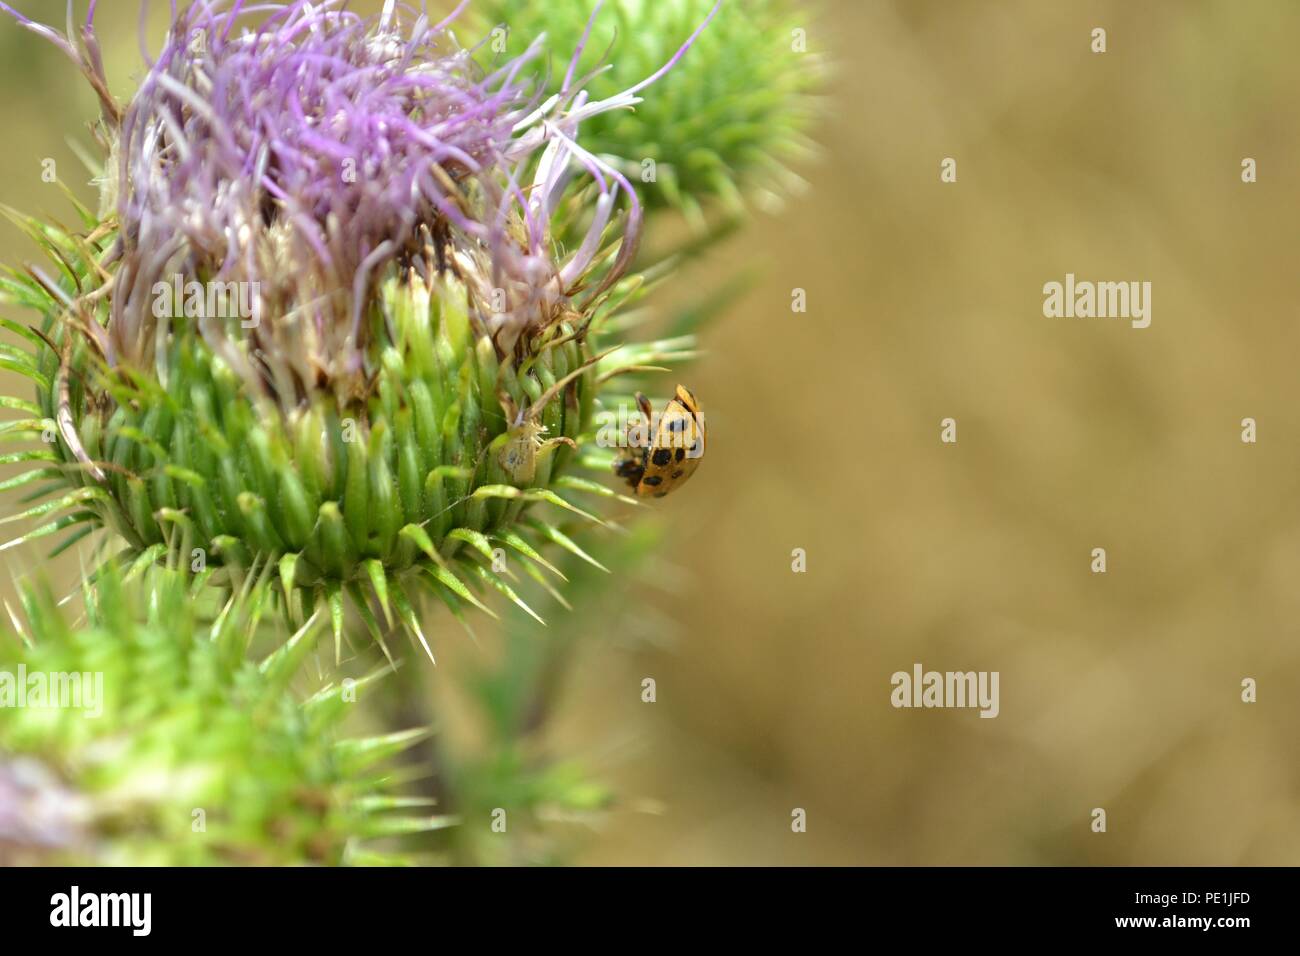 Closeup photograph of a dead ladybug impaled on a spike of a purple thistle flower. Stock Photo